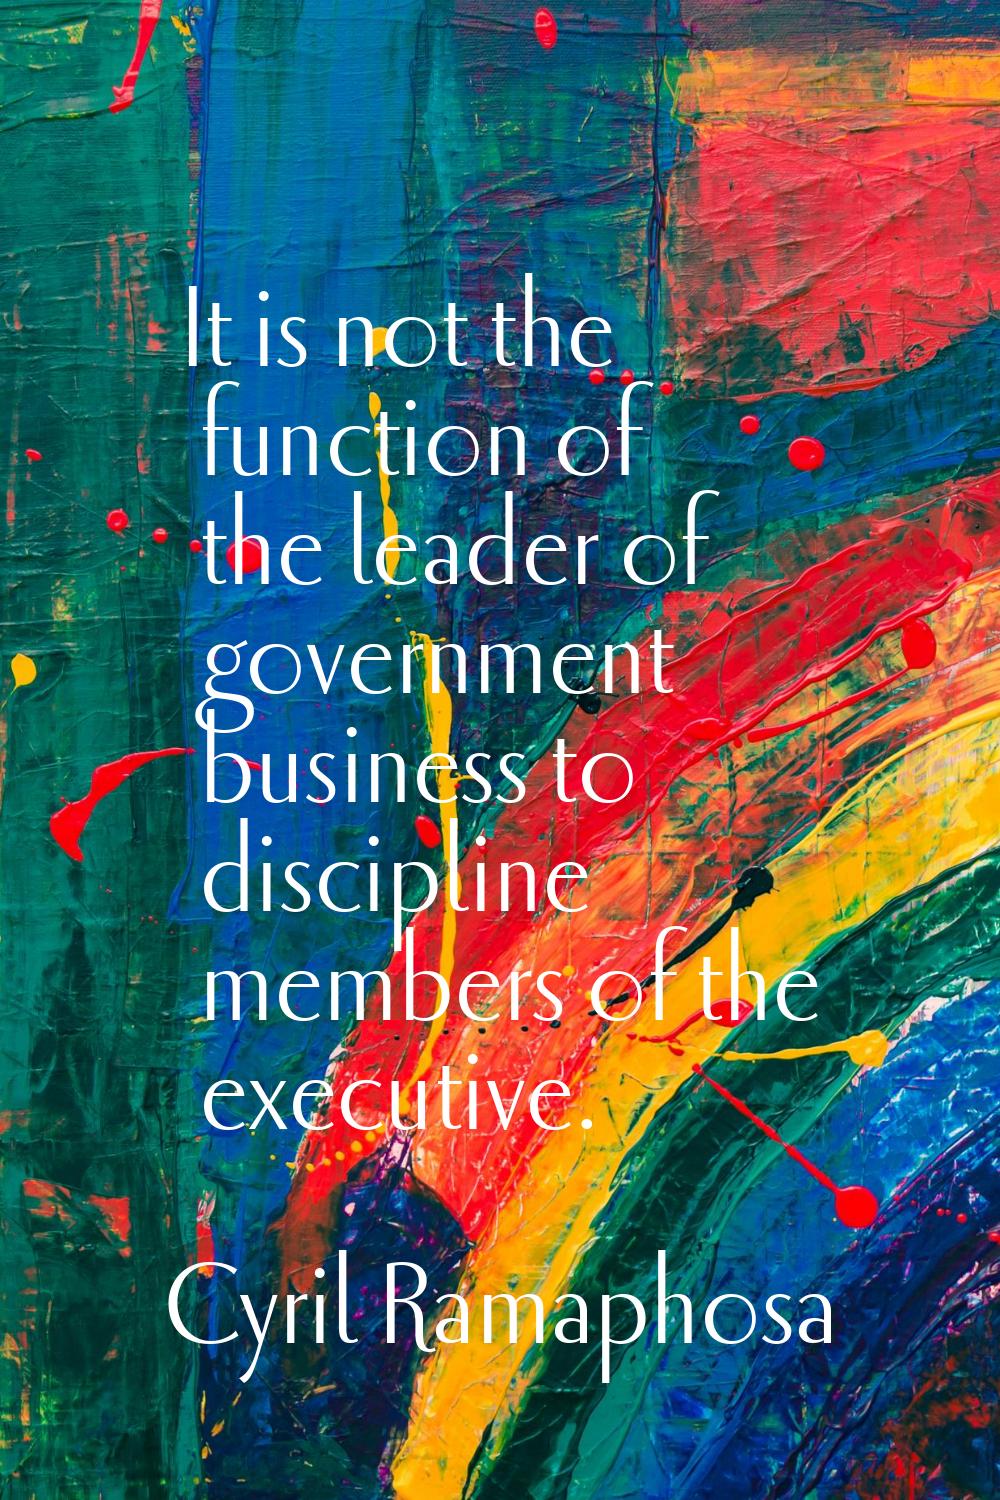 It is not the function of the leader of government business to discipline members of the executive.